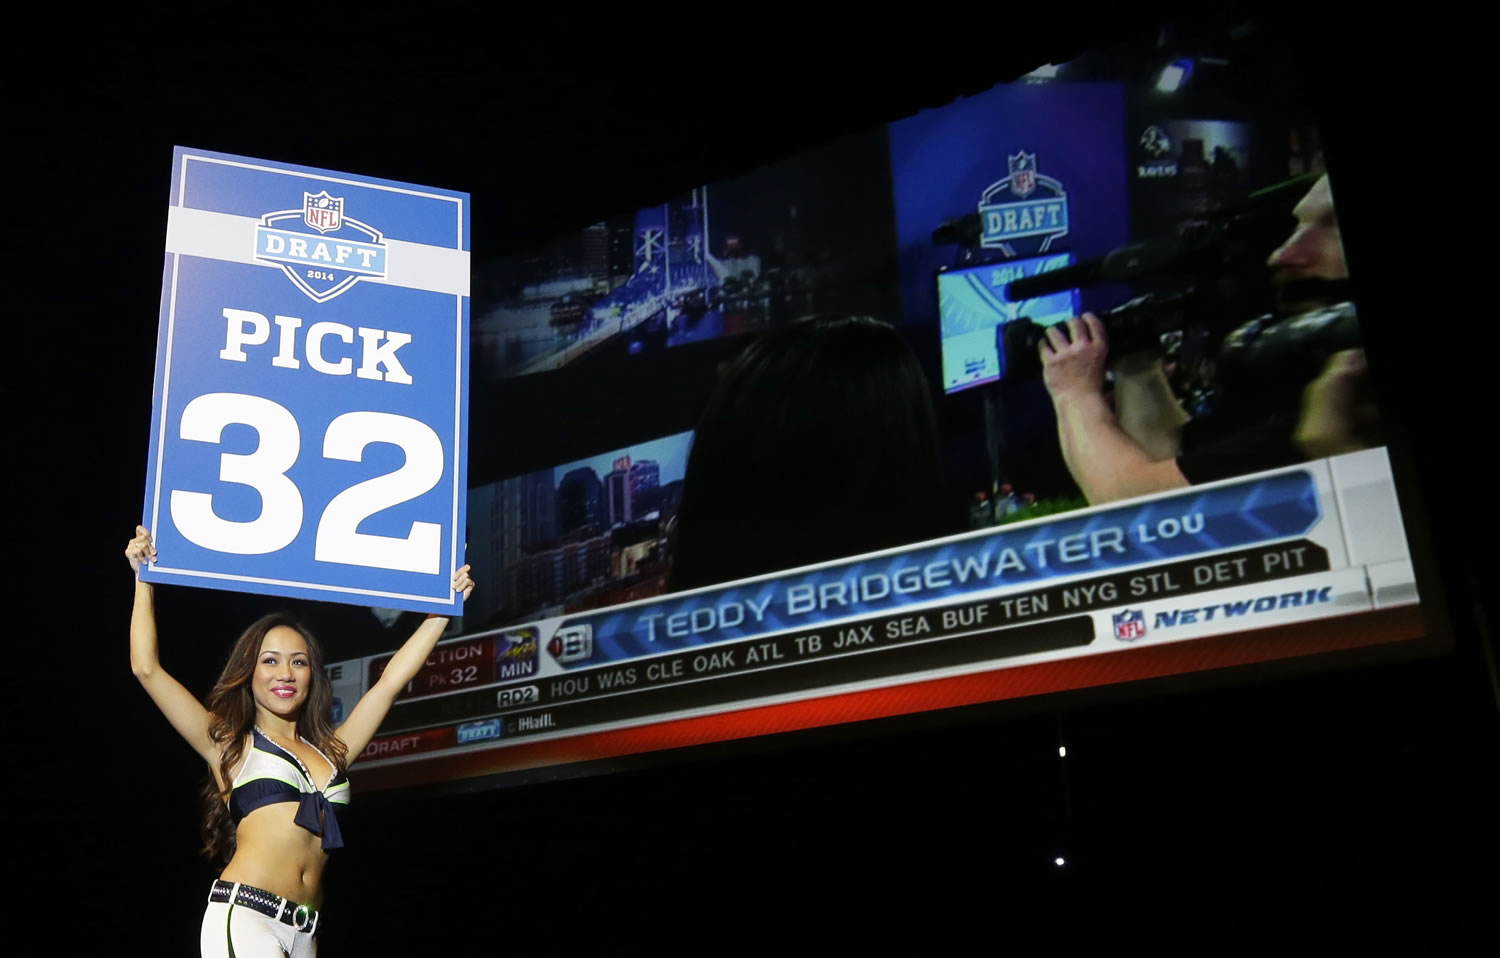 A Seattle Seahawks Sea Gals cheerleader carries a sign to announce the 32nd pick in the first round of the NFL football draft, which the Super Bowl champion Seattle Seahawks traded to the Minnesota Vikings, who selected Louisville quarterback Teddy Bridgewater.